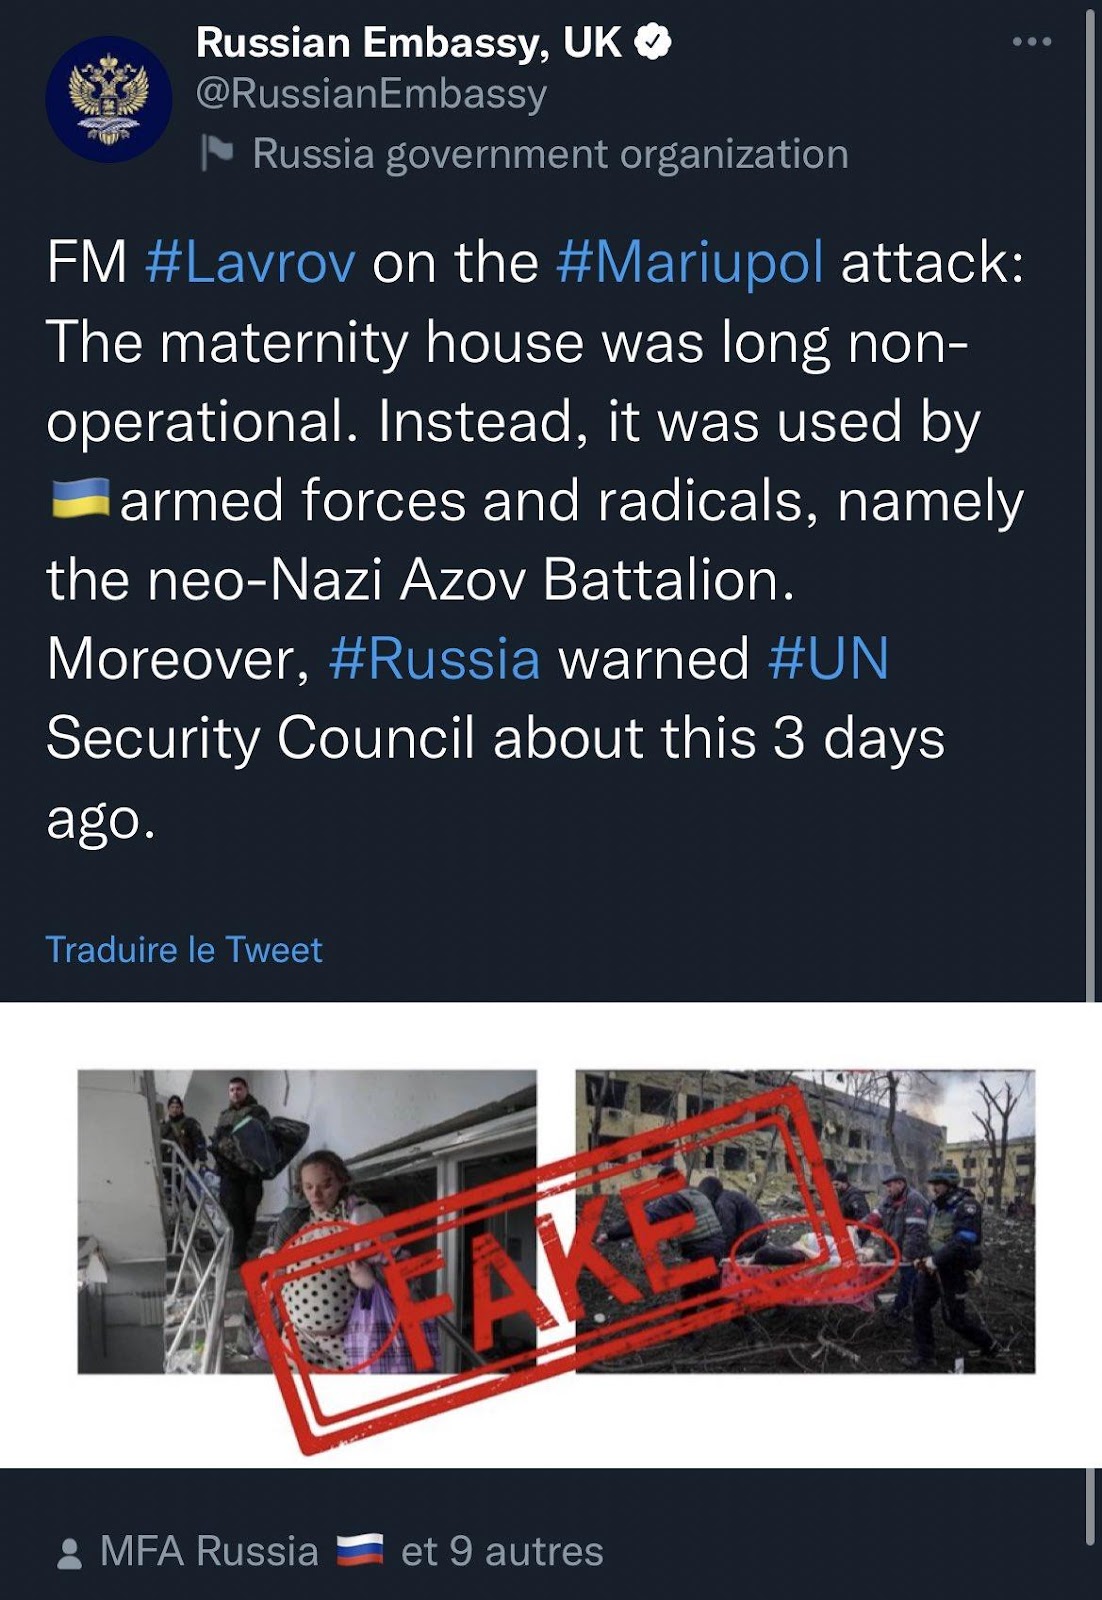 TWEET from @RussianEmbassy, UK FM #Lavrov on the #Mariupol attack: the maternity house was long non-operational. Instead, it was used by 🇺🇦 armed forces and radicals, namely the neo-Nazi Azoz Battalion. Moreover, #Russia warned #UN Security Council about this 3 days ago.